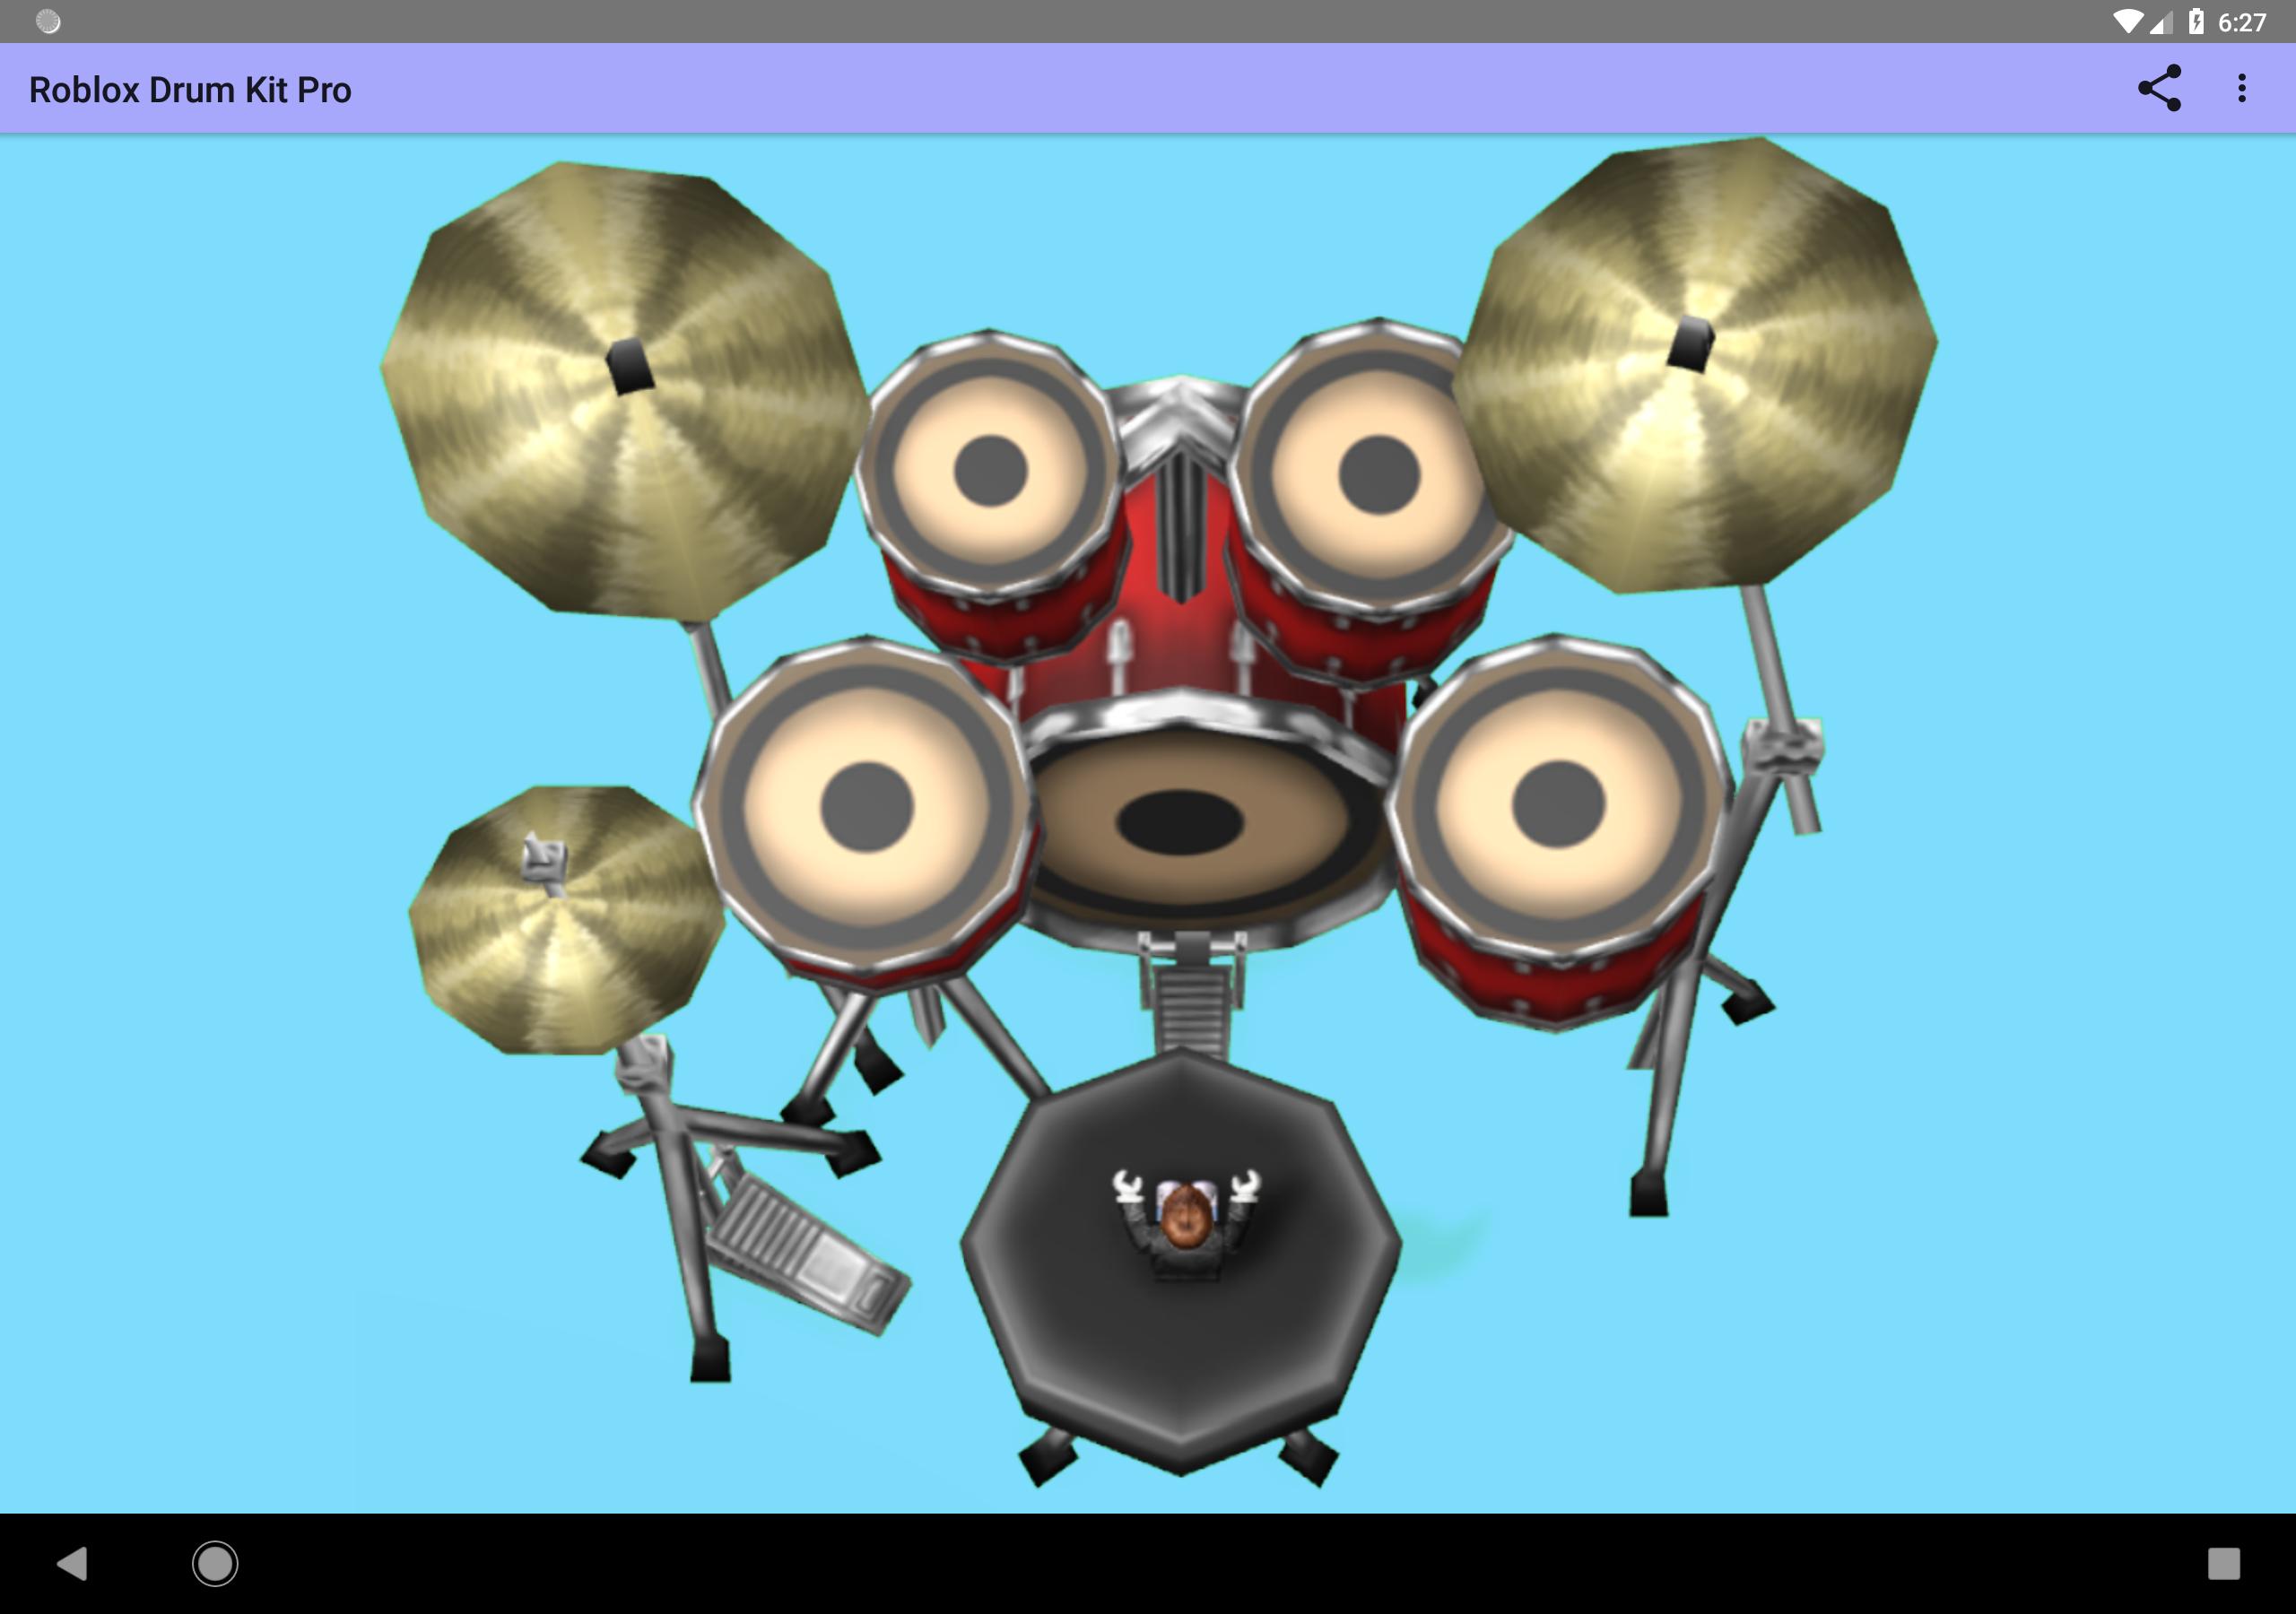 Pro Roblox Oof Drum Kit Death Sound Meme Drums For Android - roblox death note game